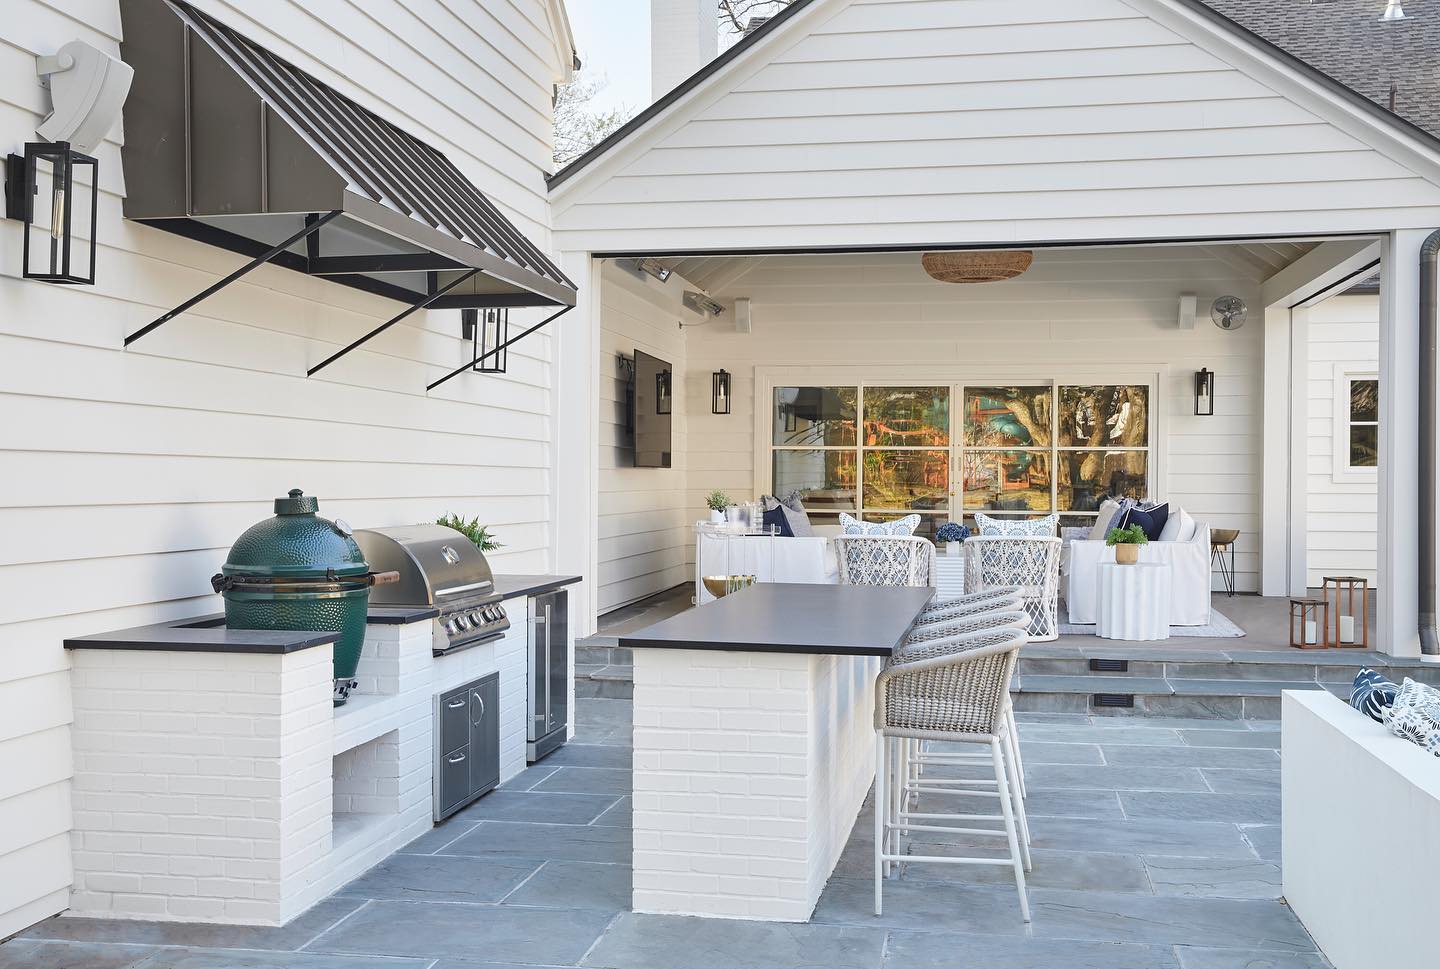 backyard bbq with this outdoor kitchen entertainment area